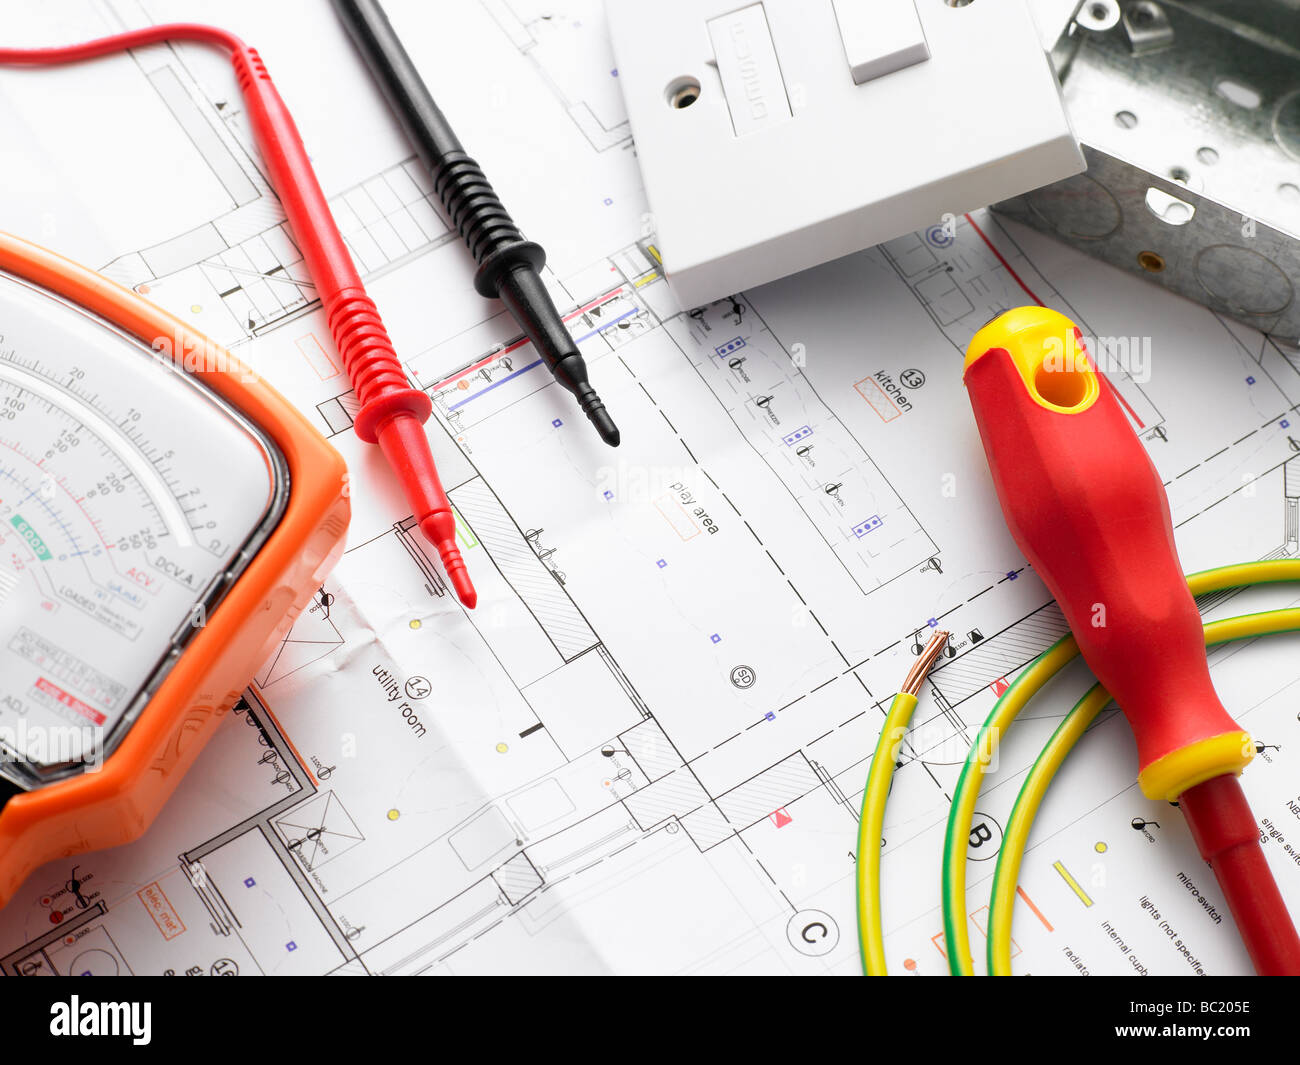 Electrical Equipment On House Plans Stock Photo